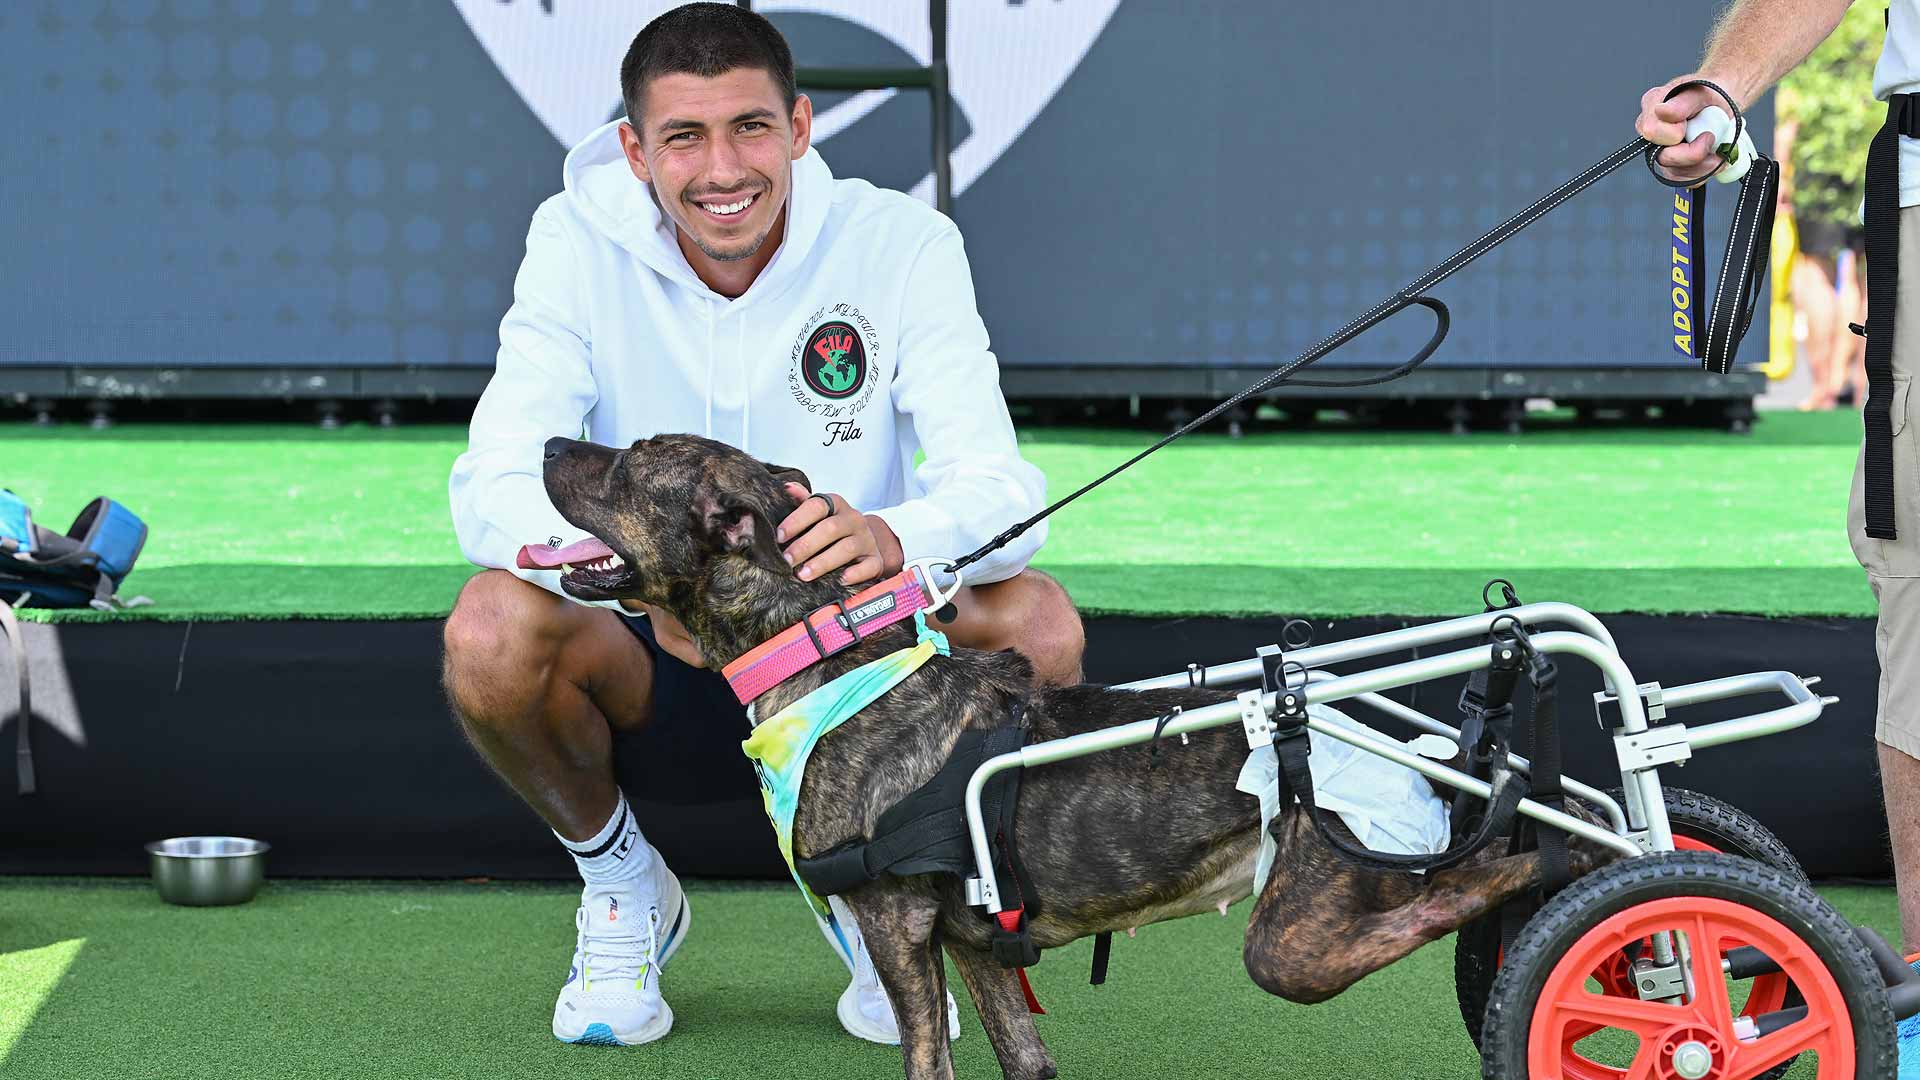 Alexei Popyrin poses for a photo with Roulette of the Cincinnati Animal Care Shelter & Resource Centre on Wednesday at the Western & Southern Open.